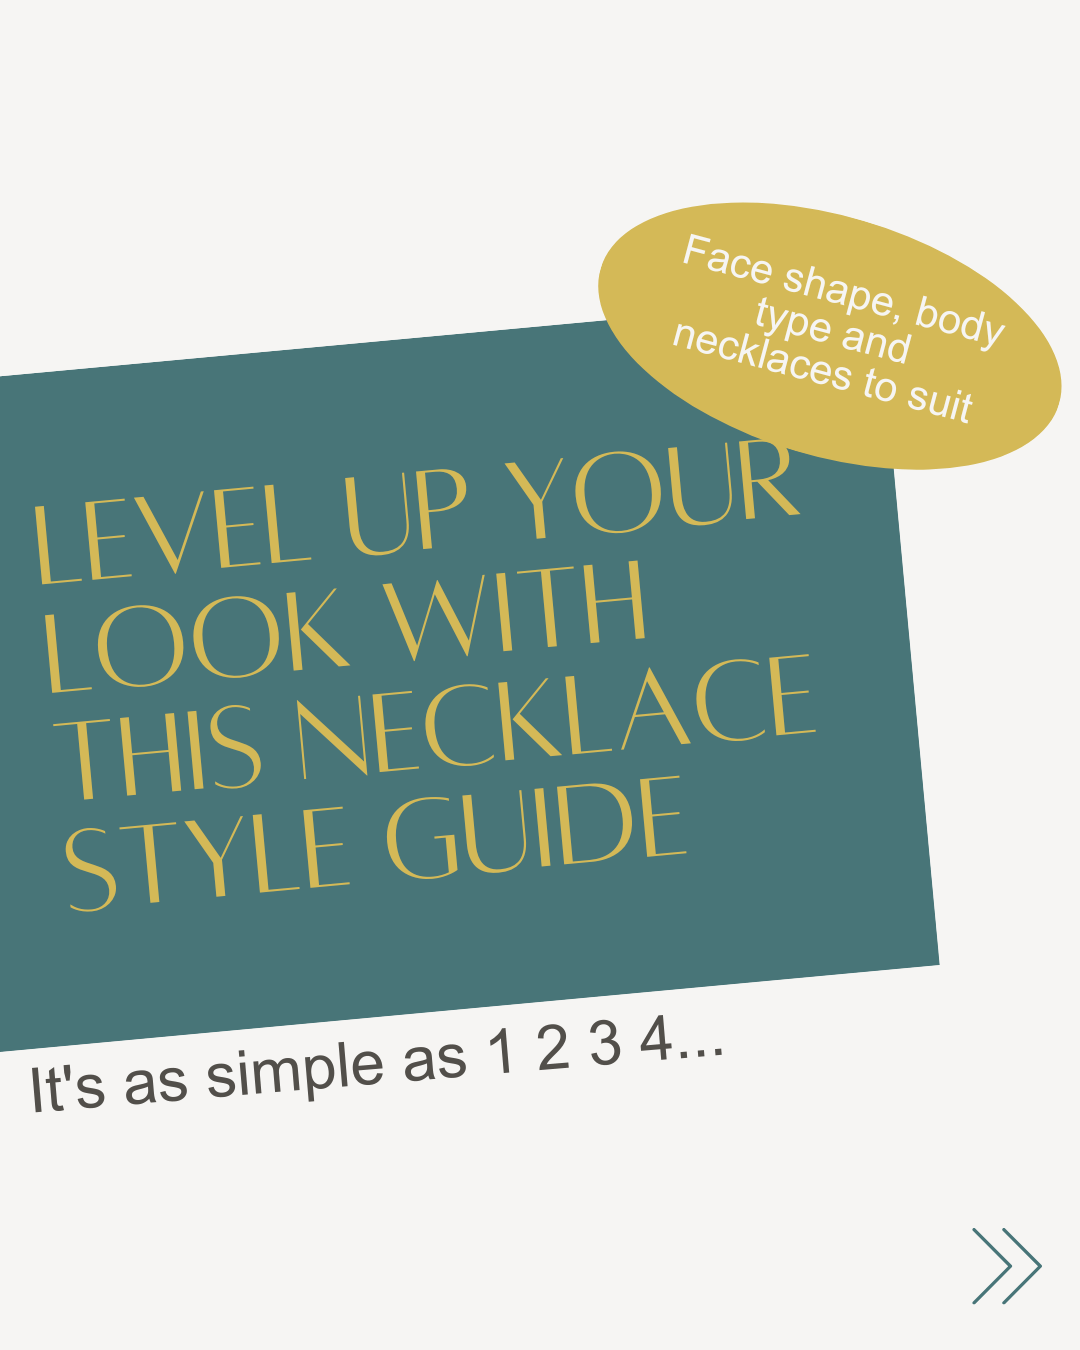 FREE Necklace style guide - M. Elizabeth